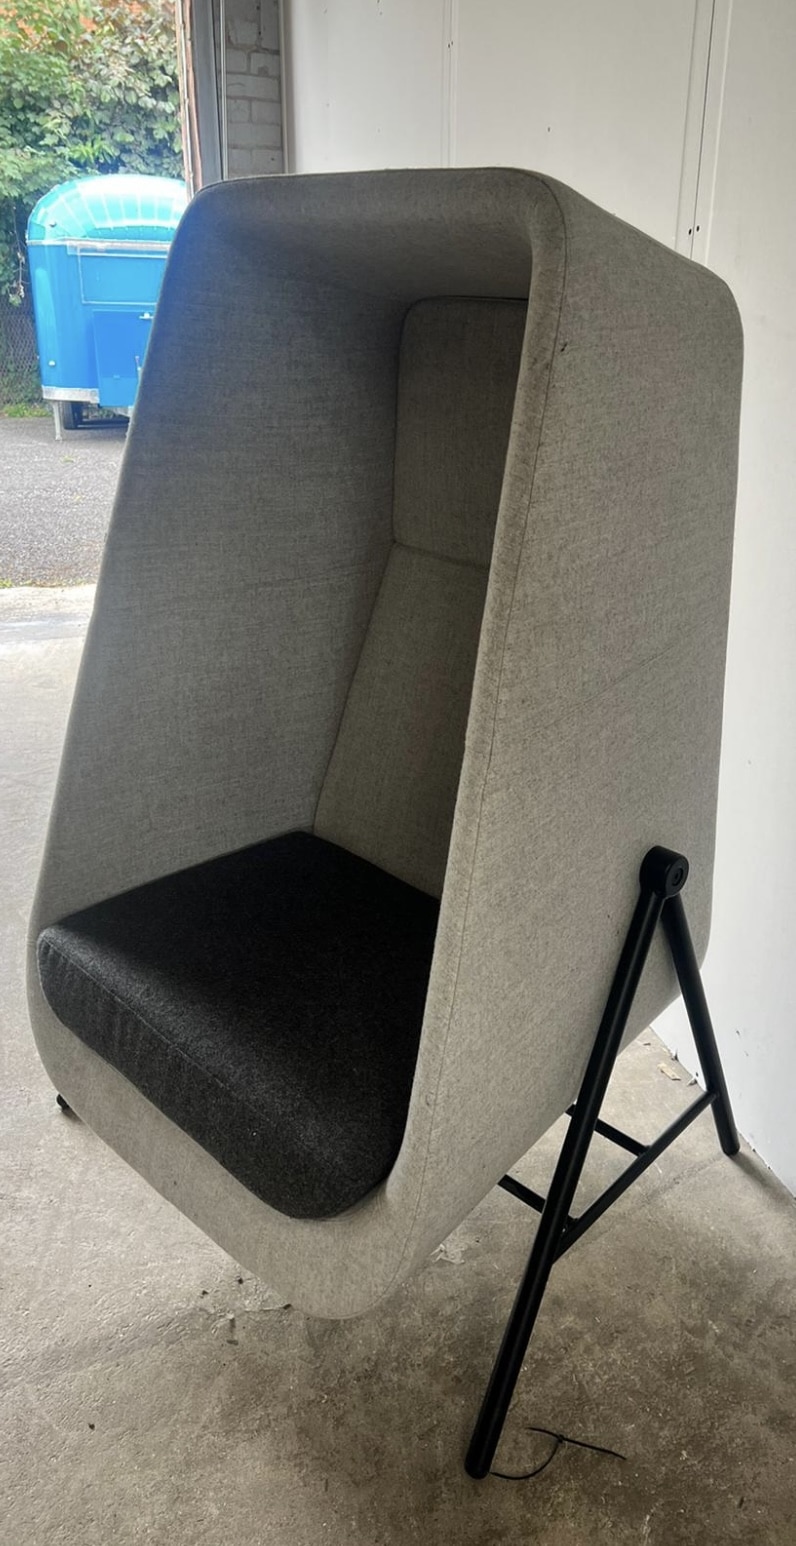 Connection Muse SMS1BOOTH High Back Acoustic Privacy Pod Single User in Two Tone Grey Blazer Fabric